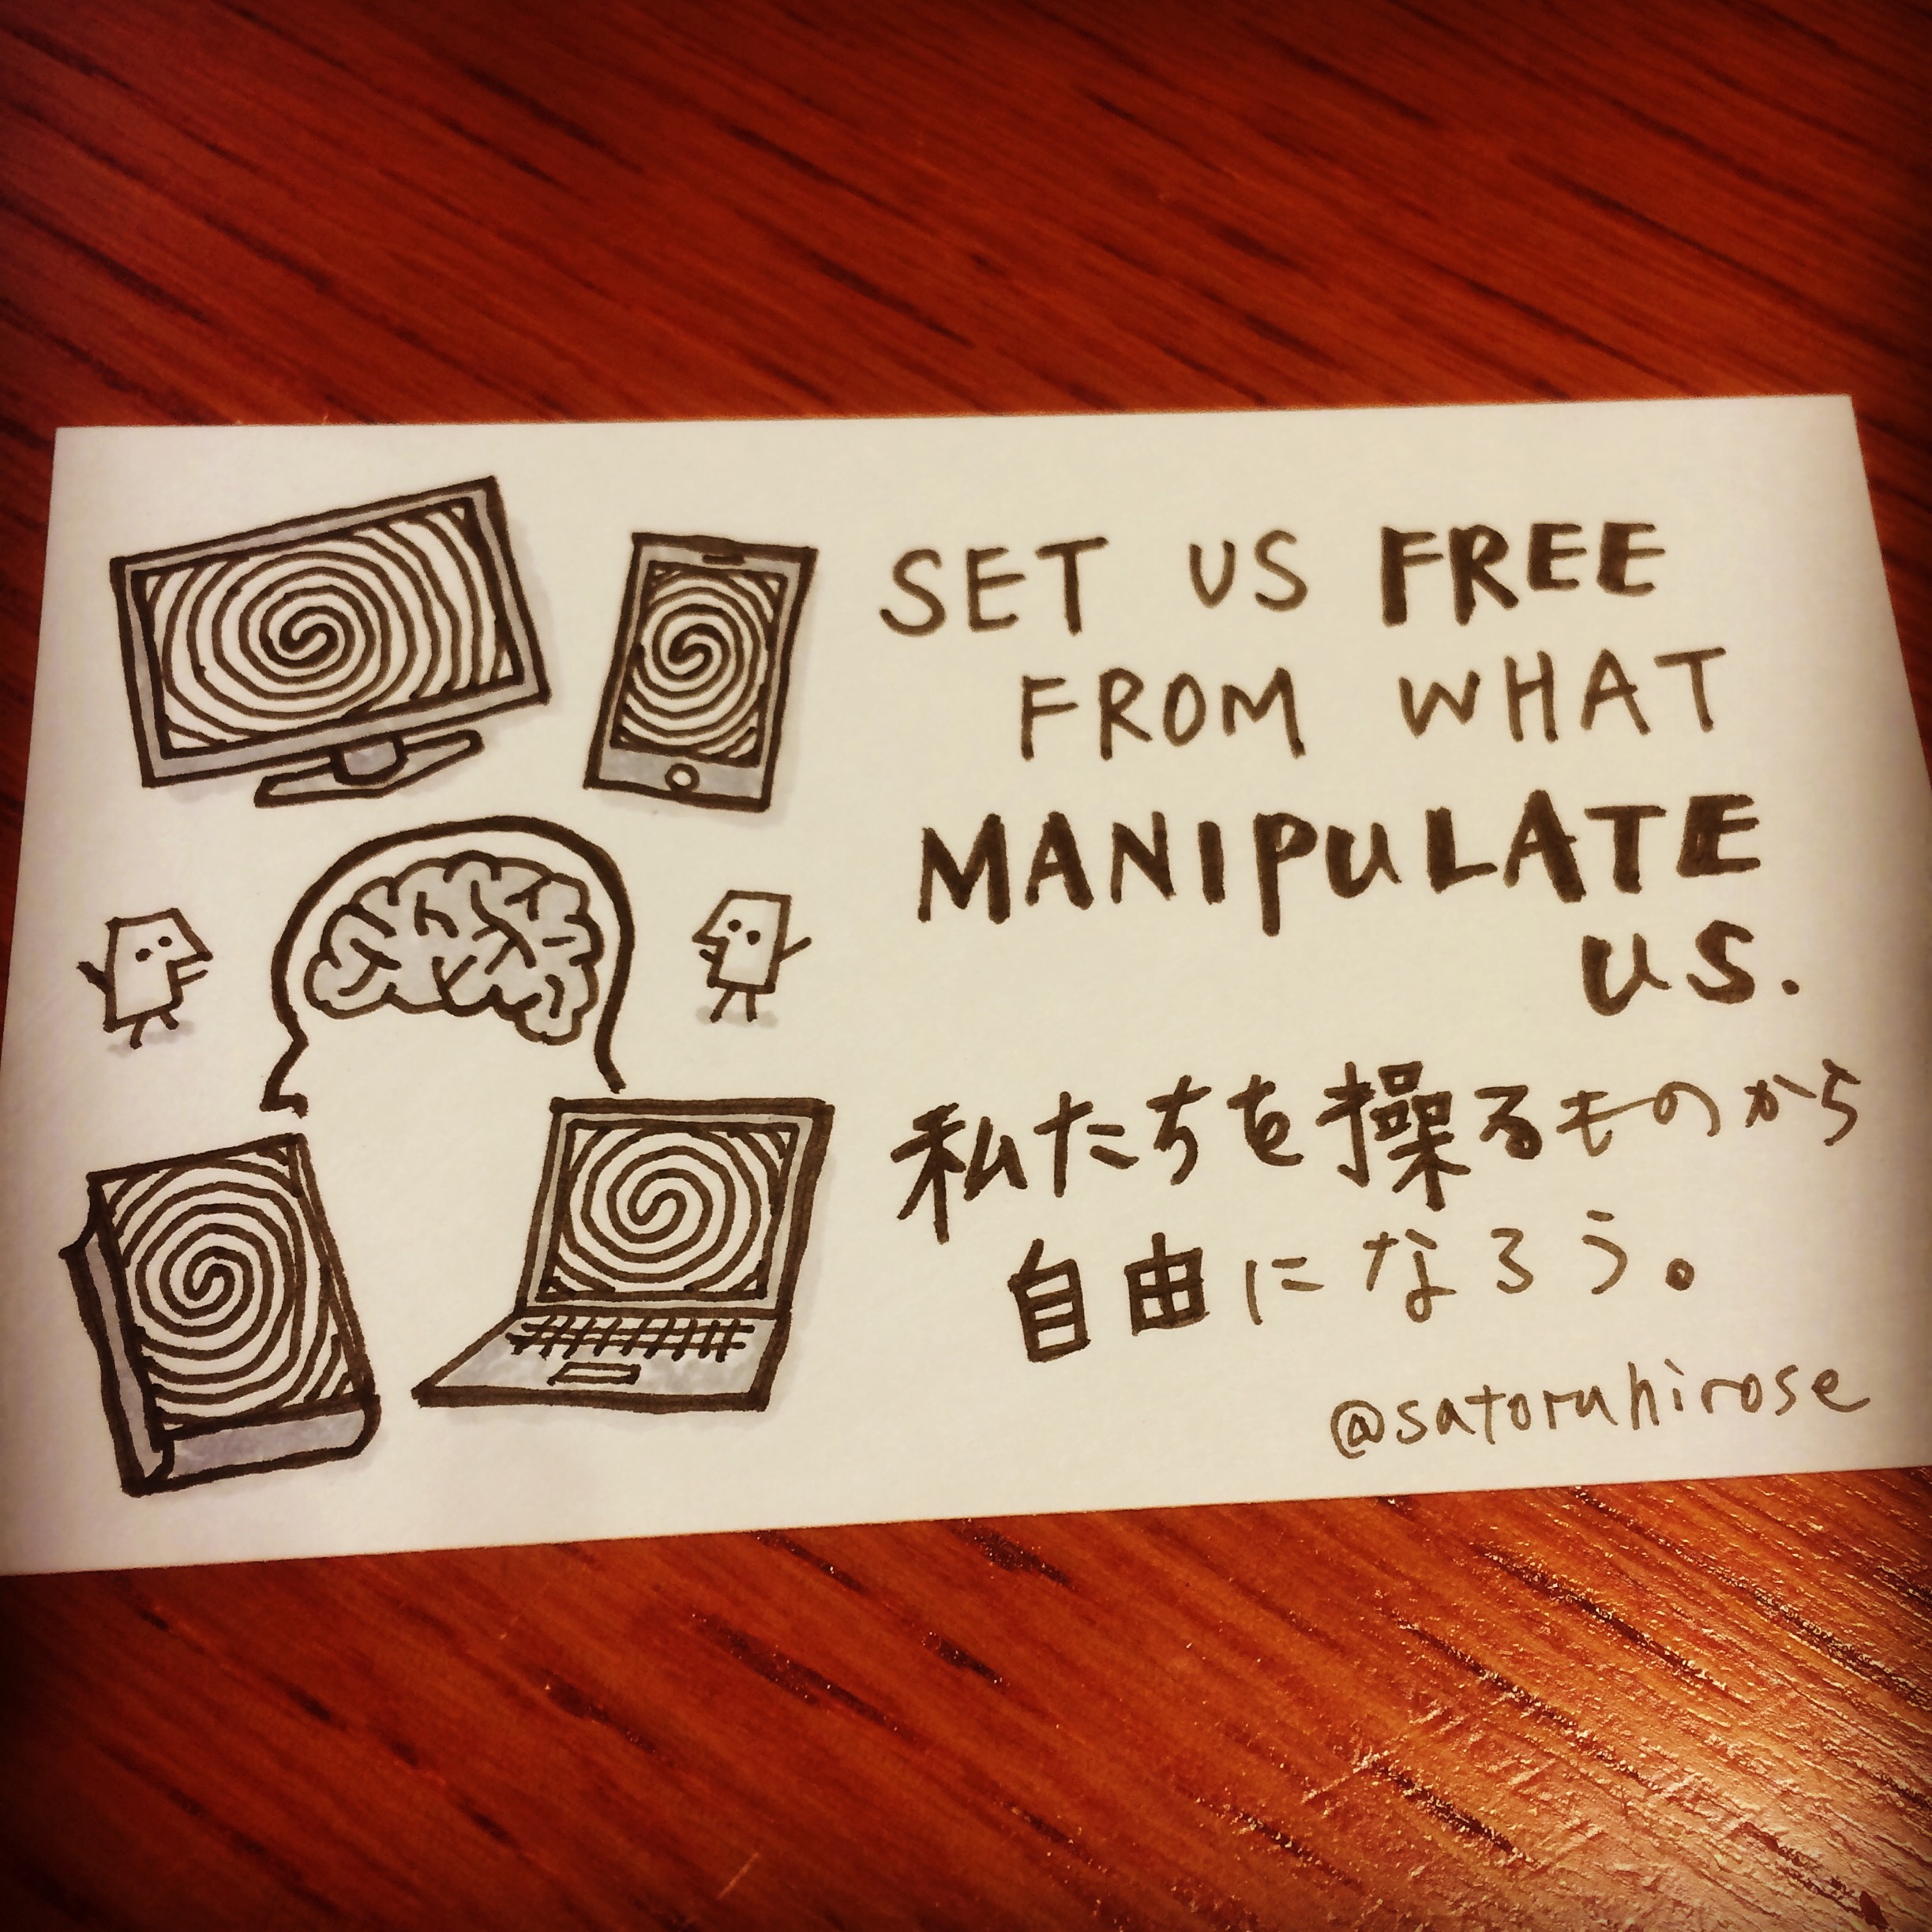 Set us free from what manipulate us.